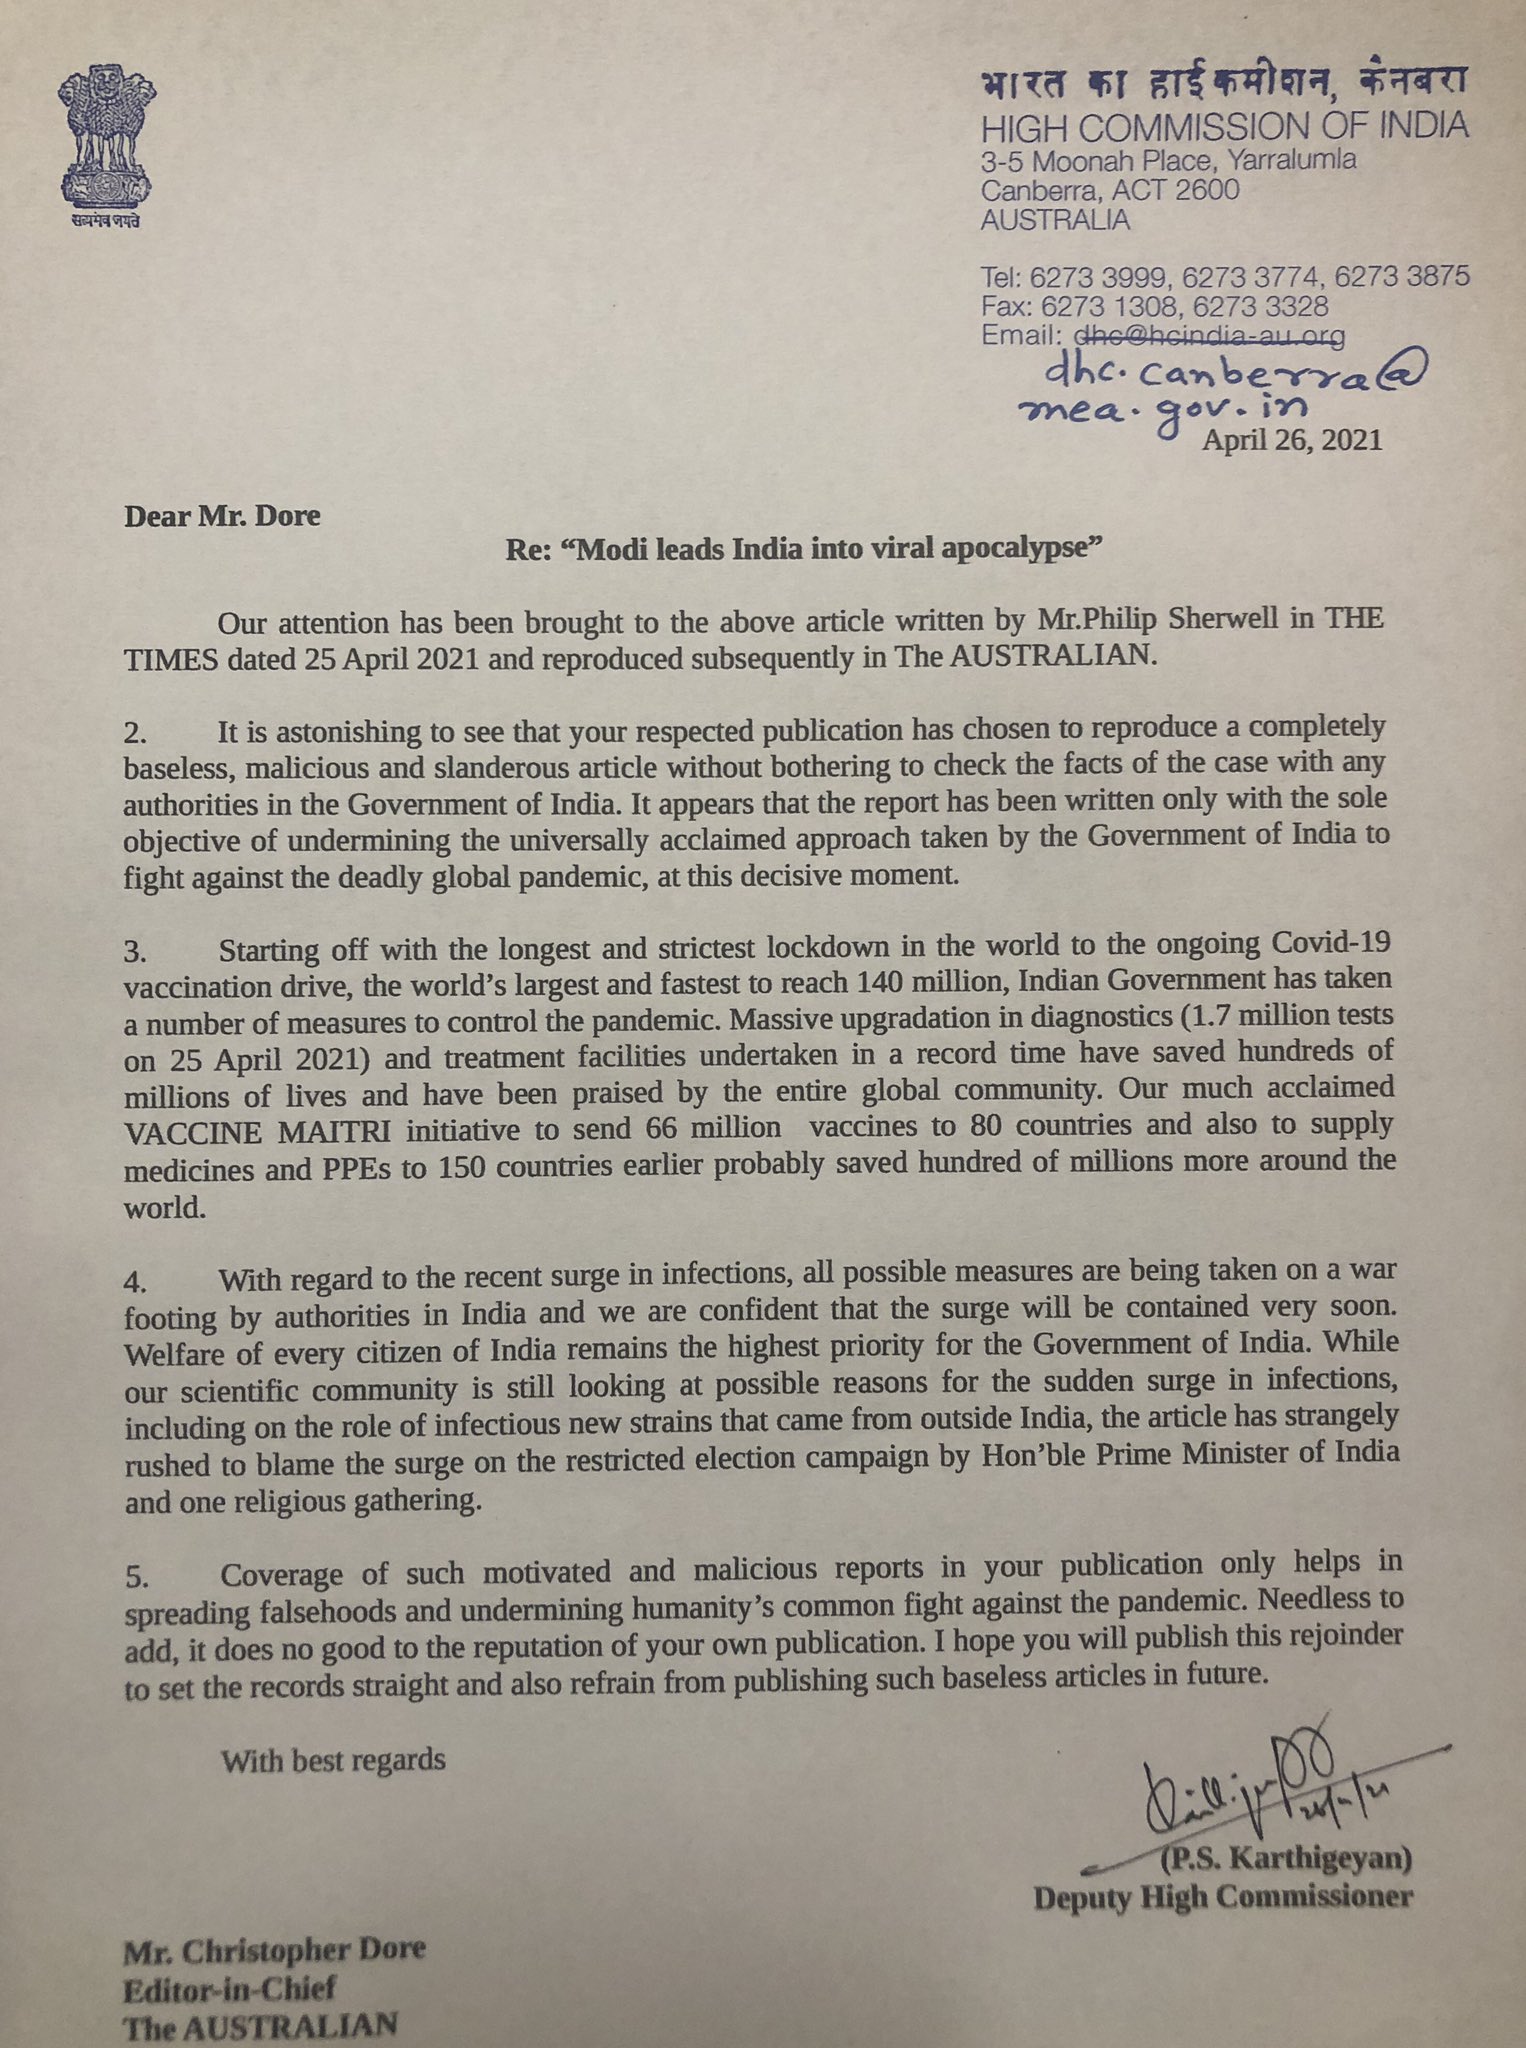 Letter from Indian High Commission